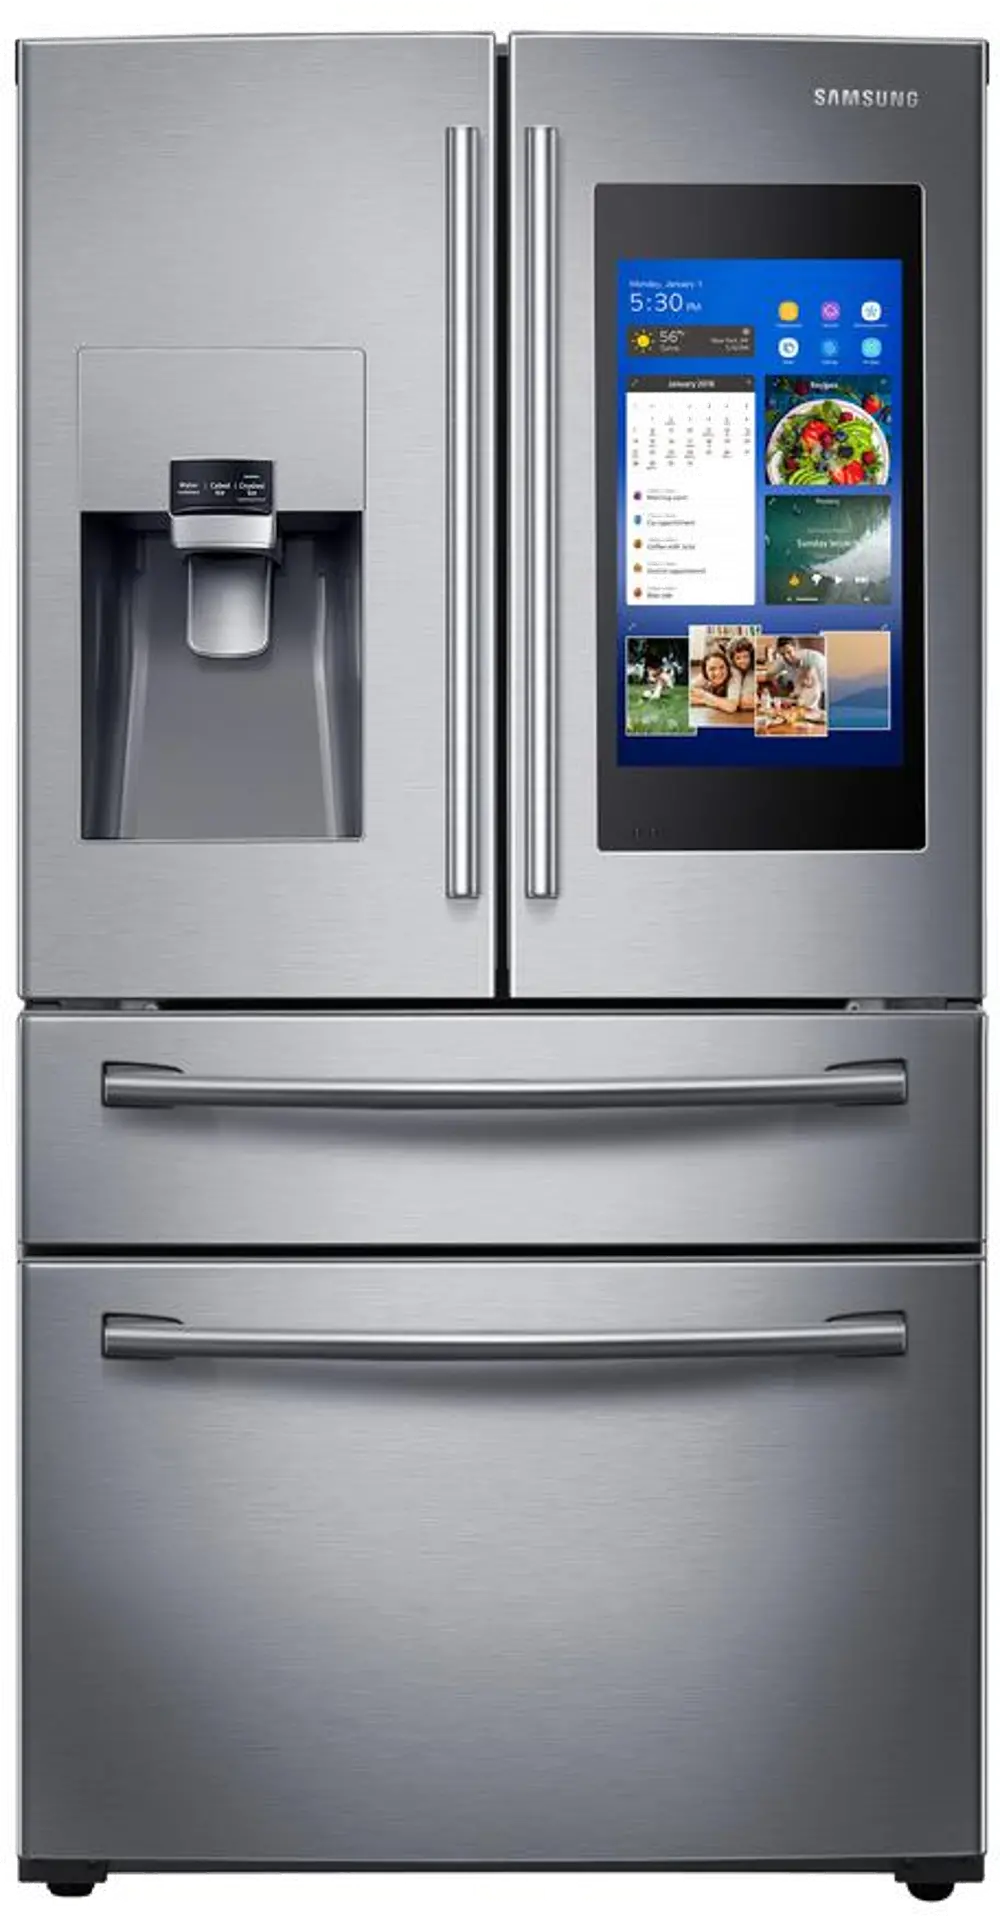 RF28NHEDBSR Samsung Family Hub French Door Refrigerator - 36 Inch Stainless Steel-1